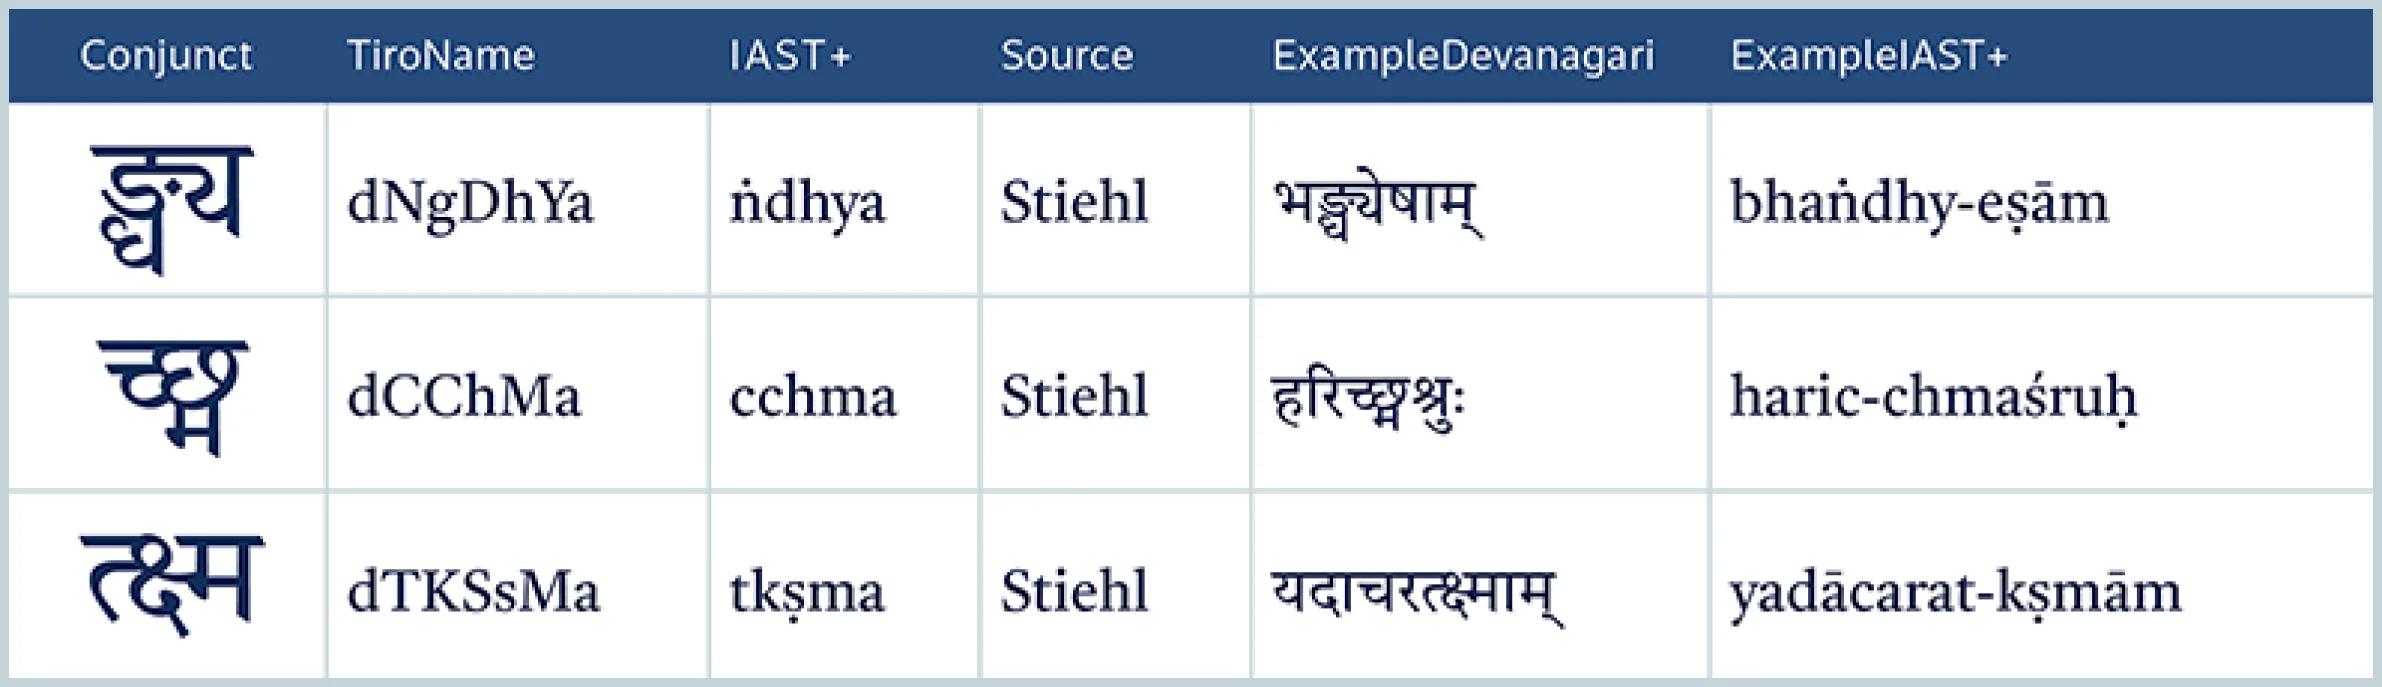 Three-row table showing conjuncts in Devanagari script with Latin transliteration and examples of use.